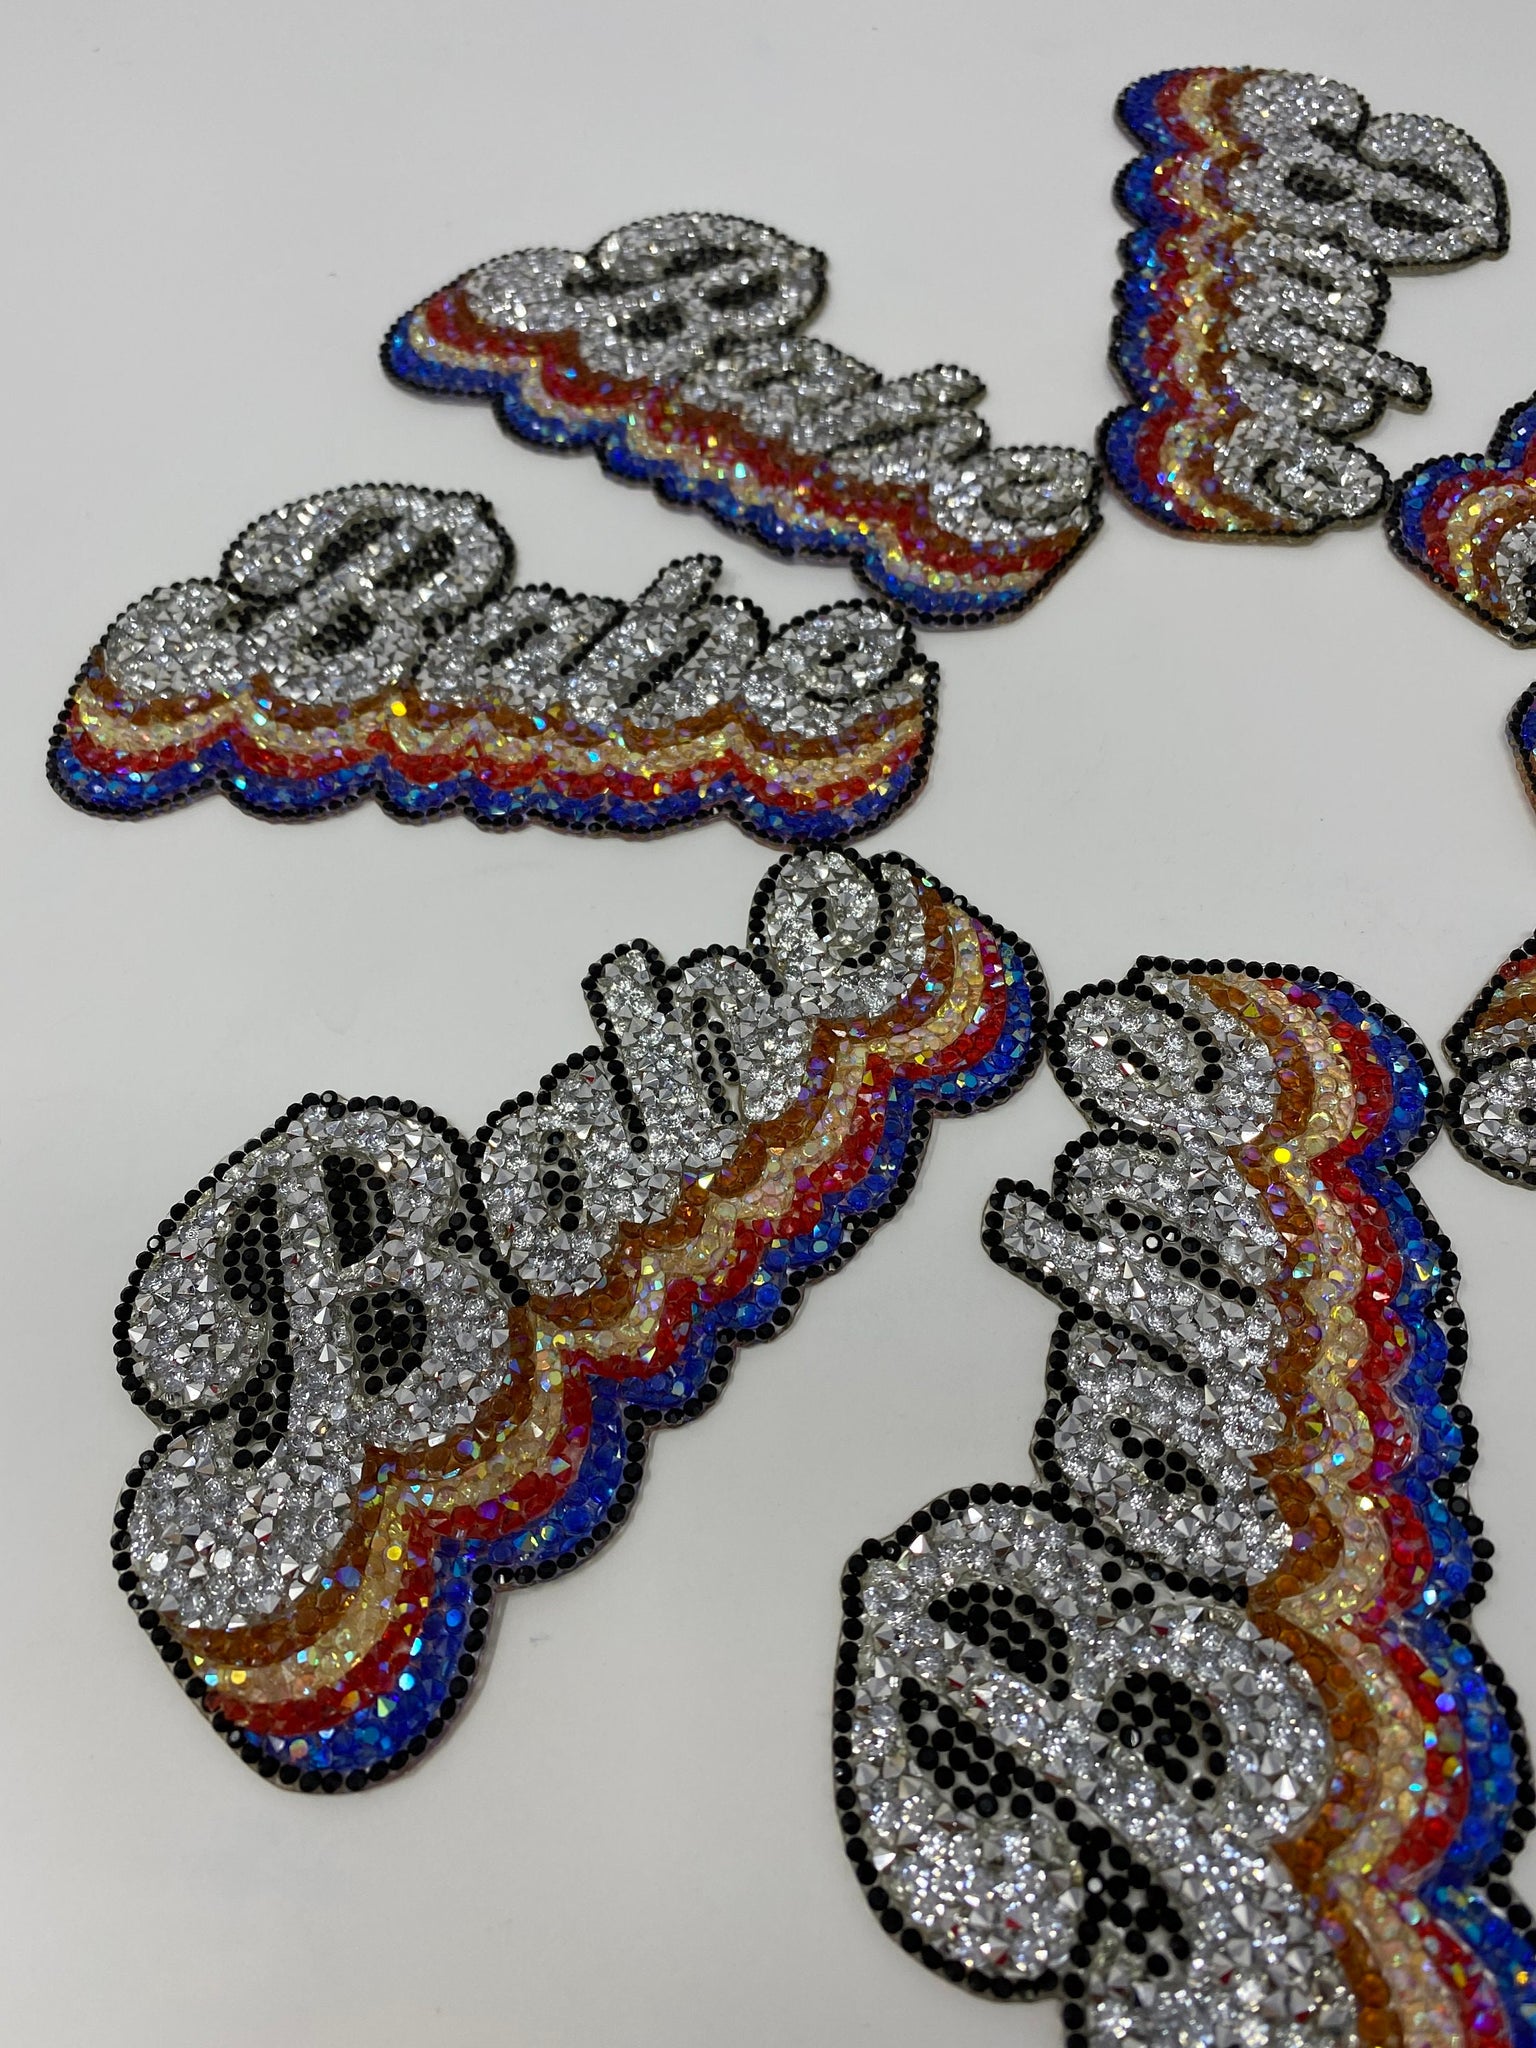 NEW Arrival, Blinged Out "Babe" Rhinestone Patch with Adhesive, Rhinestone Applique, Size 4"x2.5", Czech Rhinestones, DIY Applique